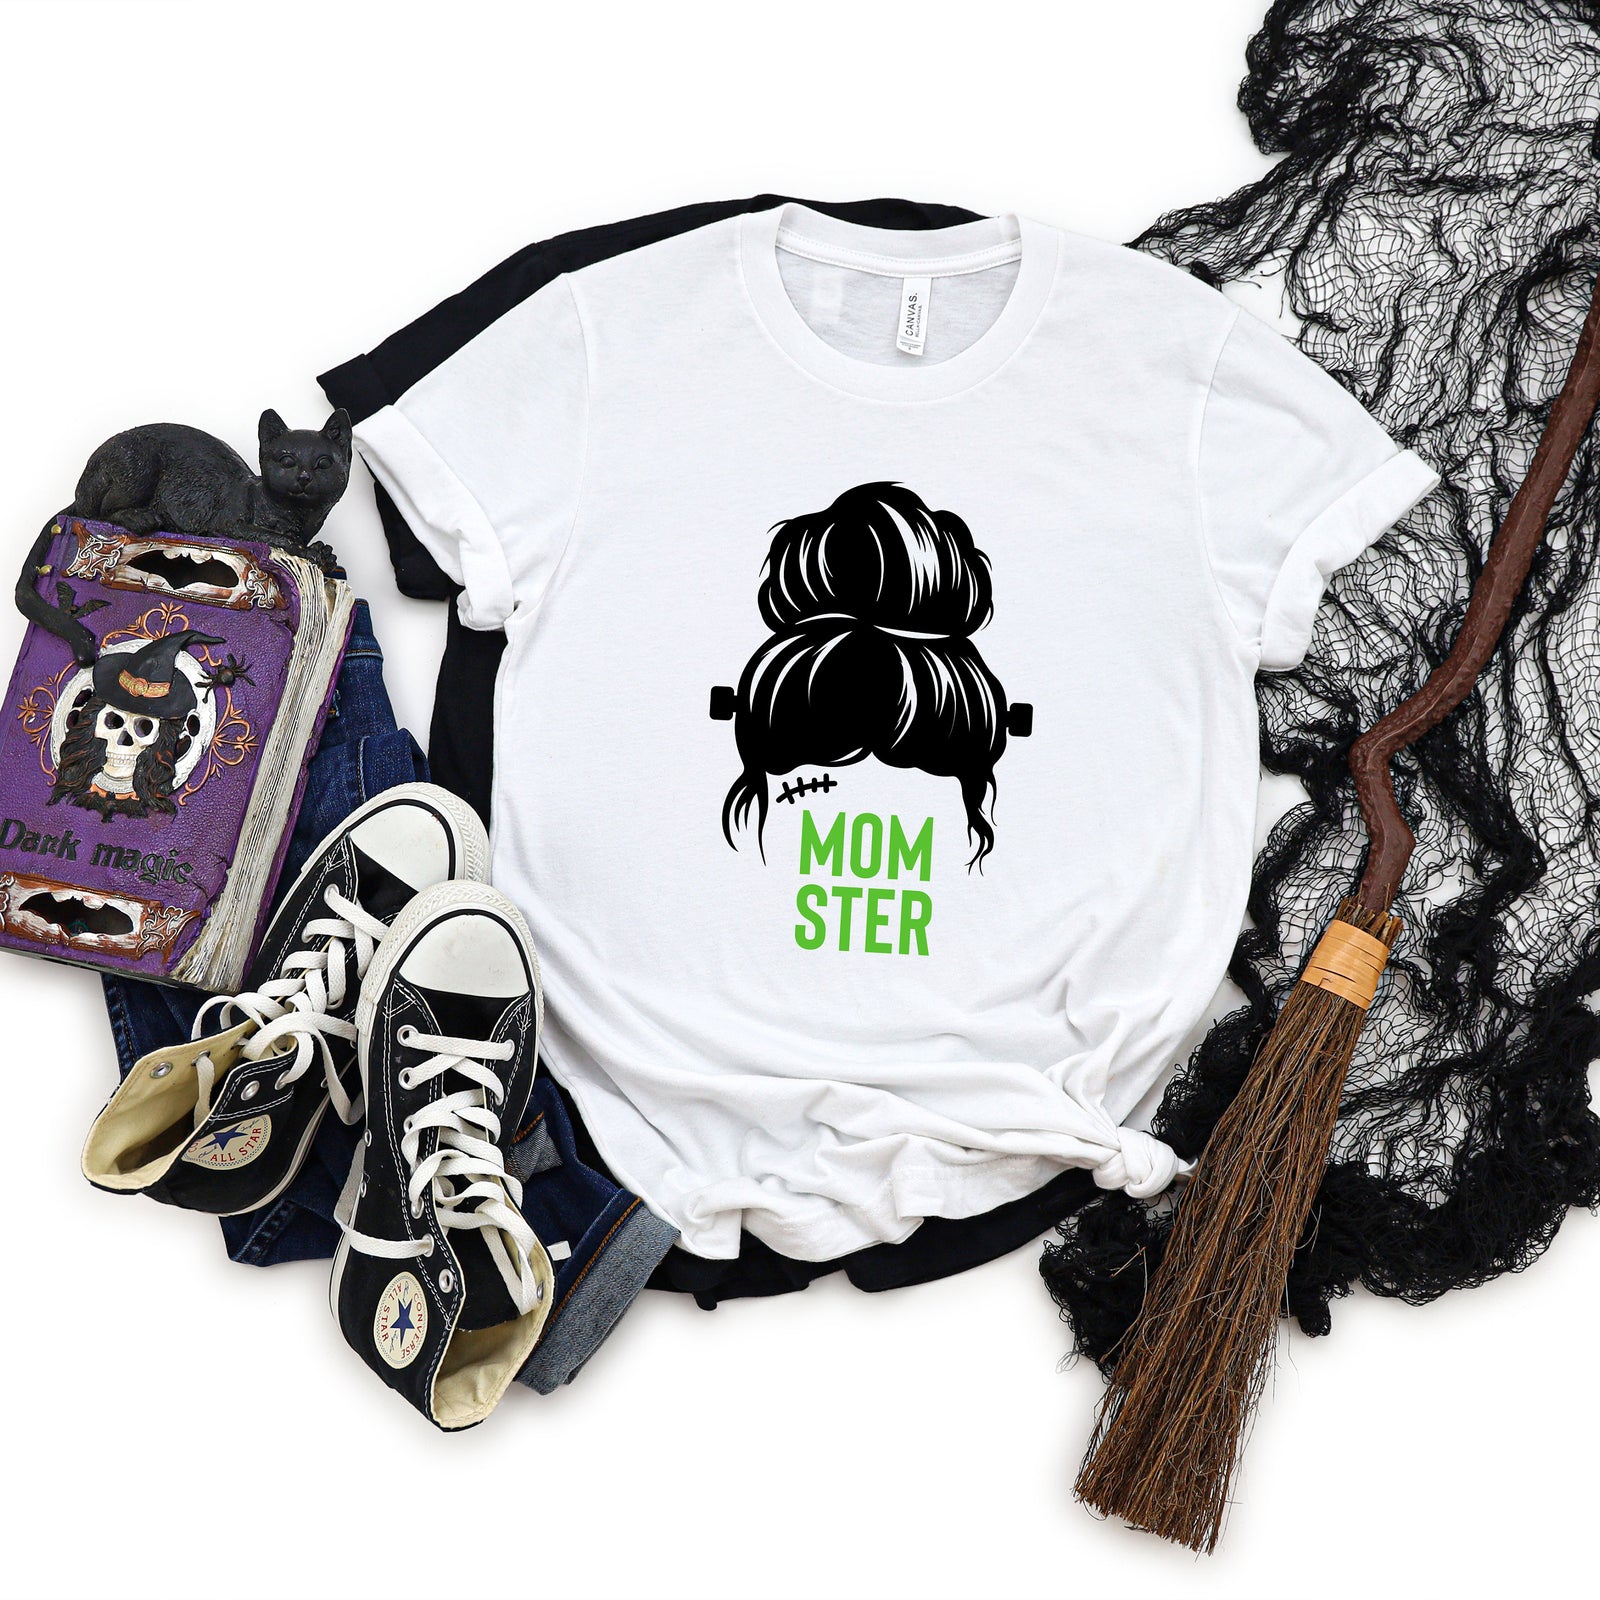 Momster with Messy Bun - Happy Halloween Adult T Shirt - Mom T Shirt - Funny T Shirts - Skull